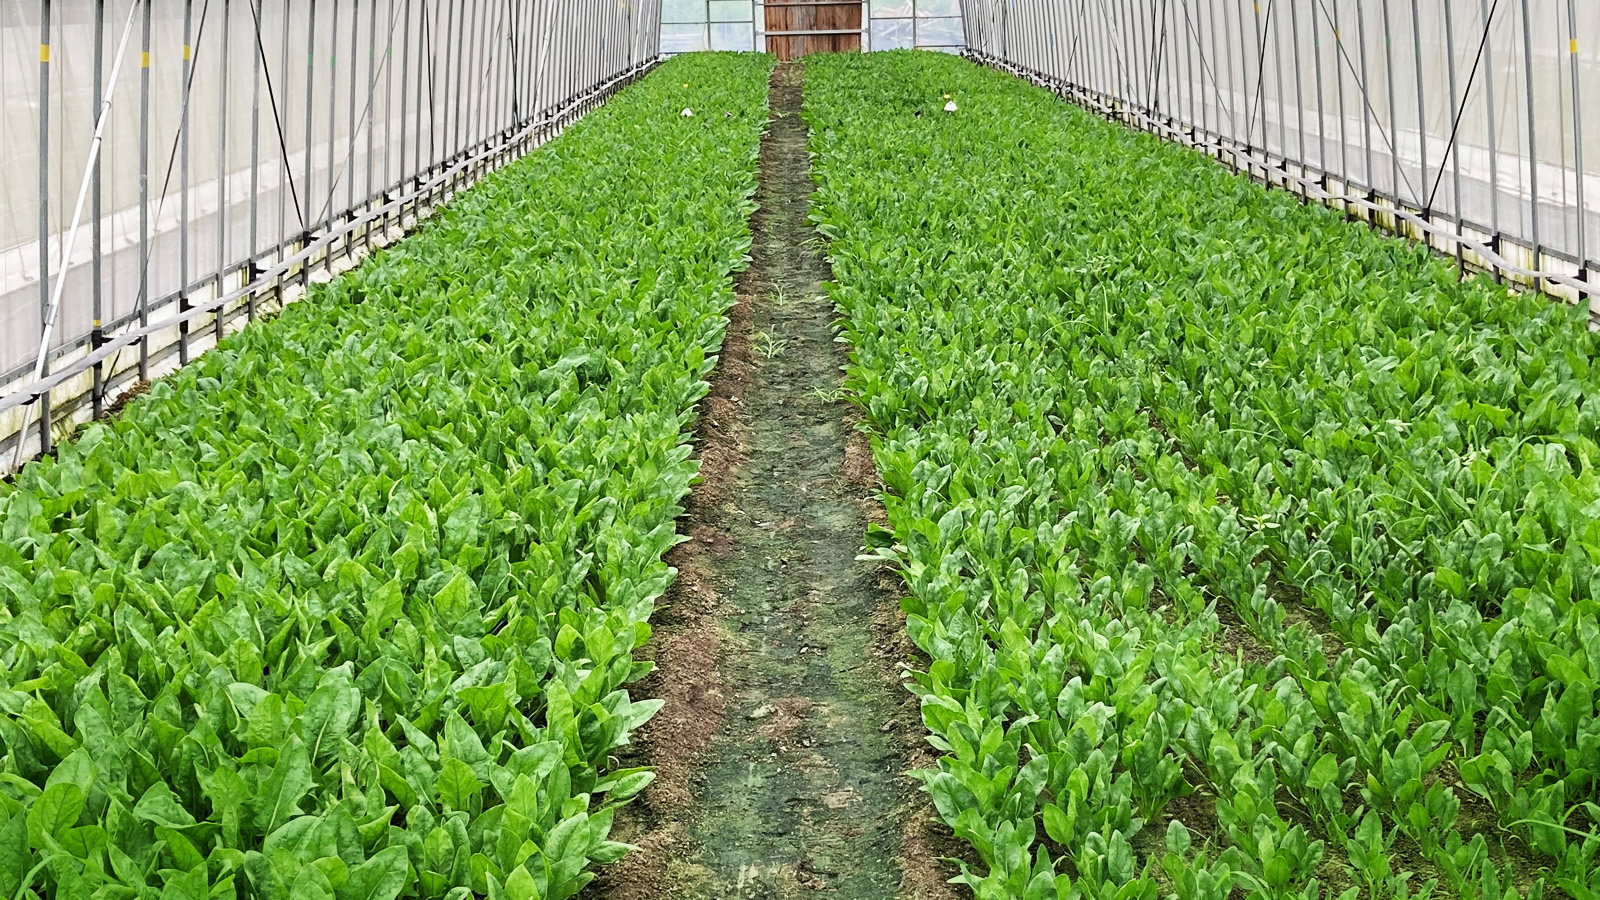 Photo: Spinach crops